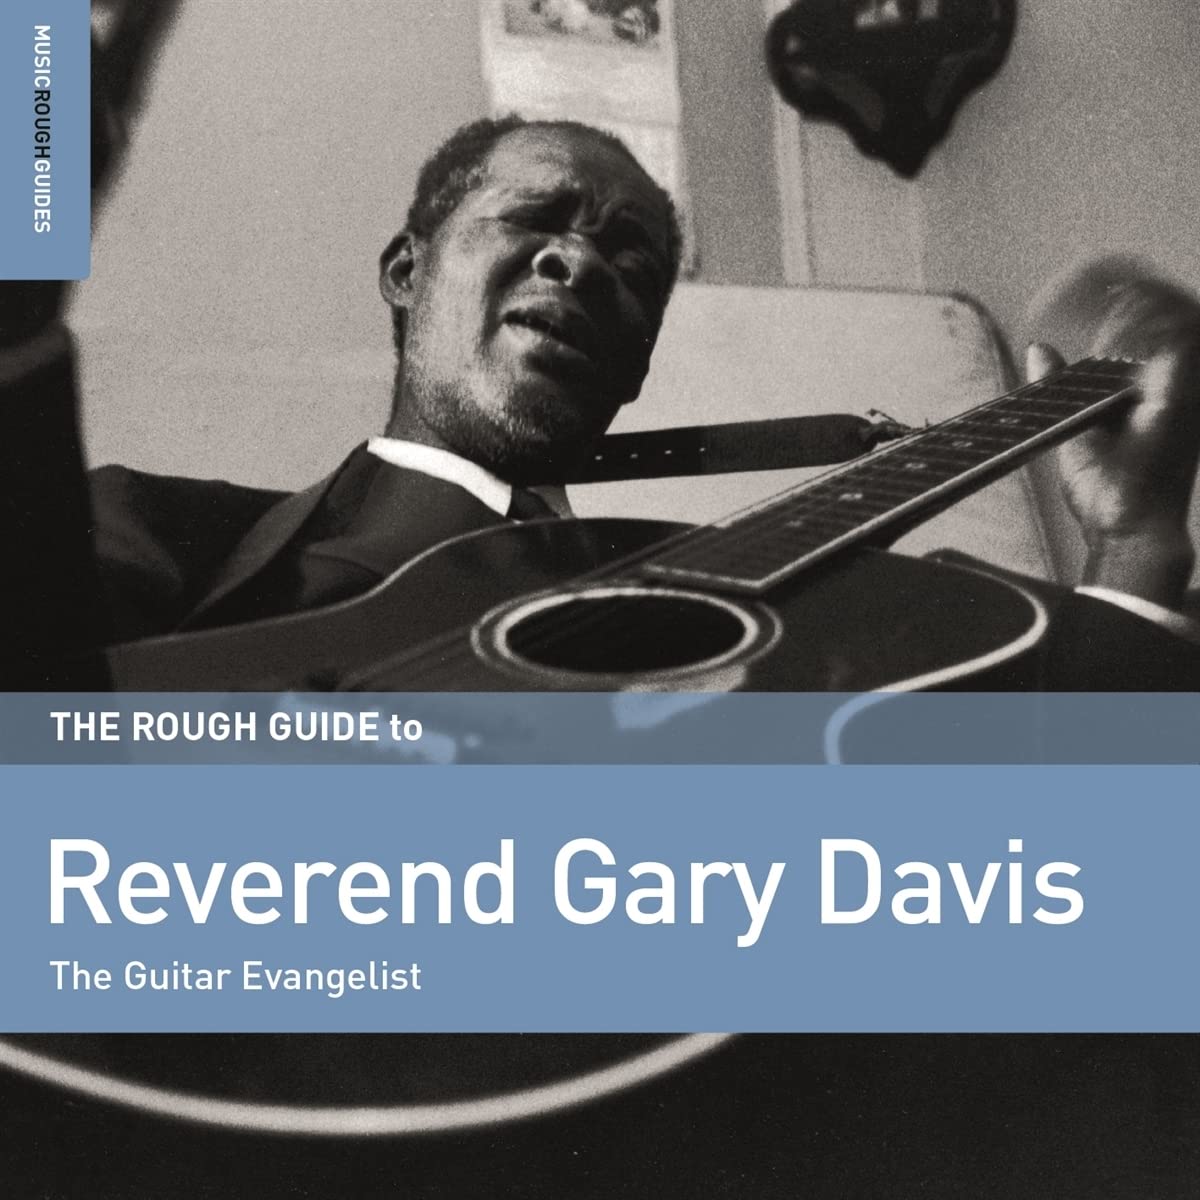 Spiritual Strings: The Life and Legacy of Reverend Gary Davis